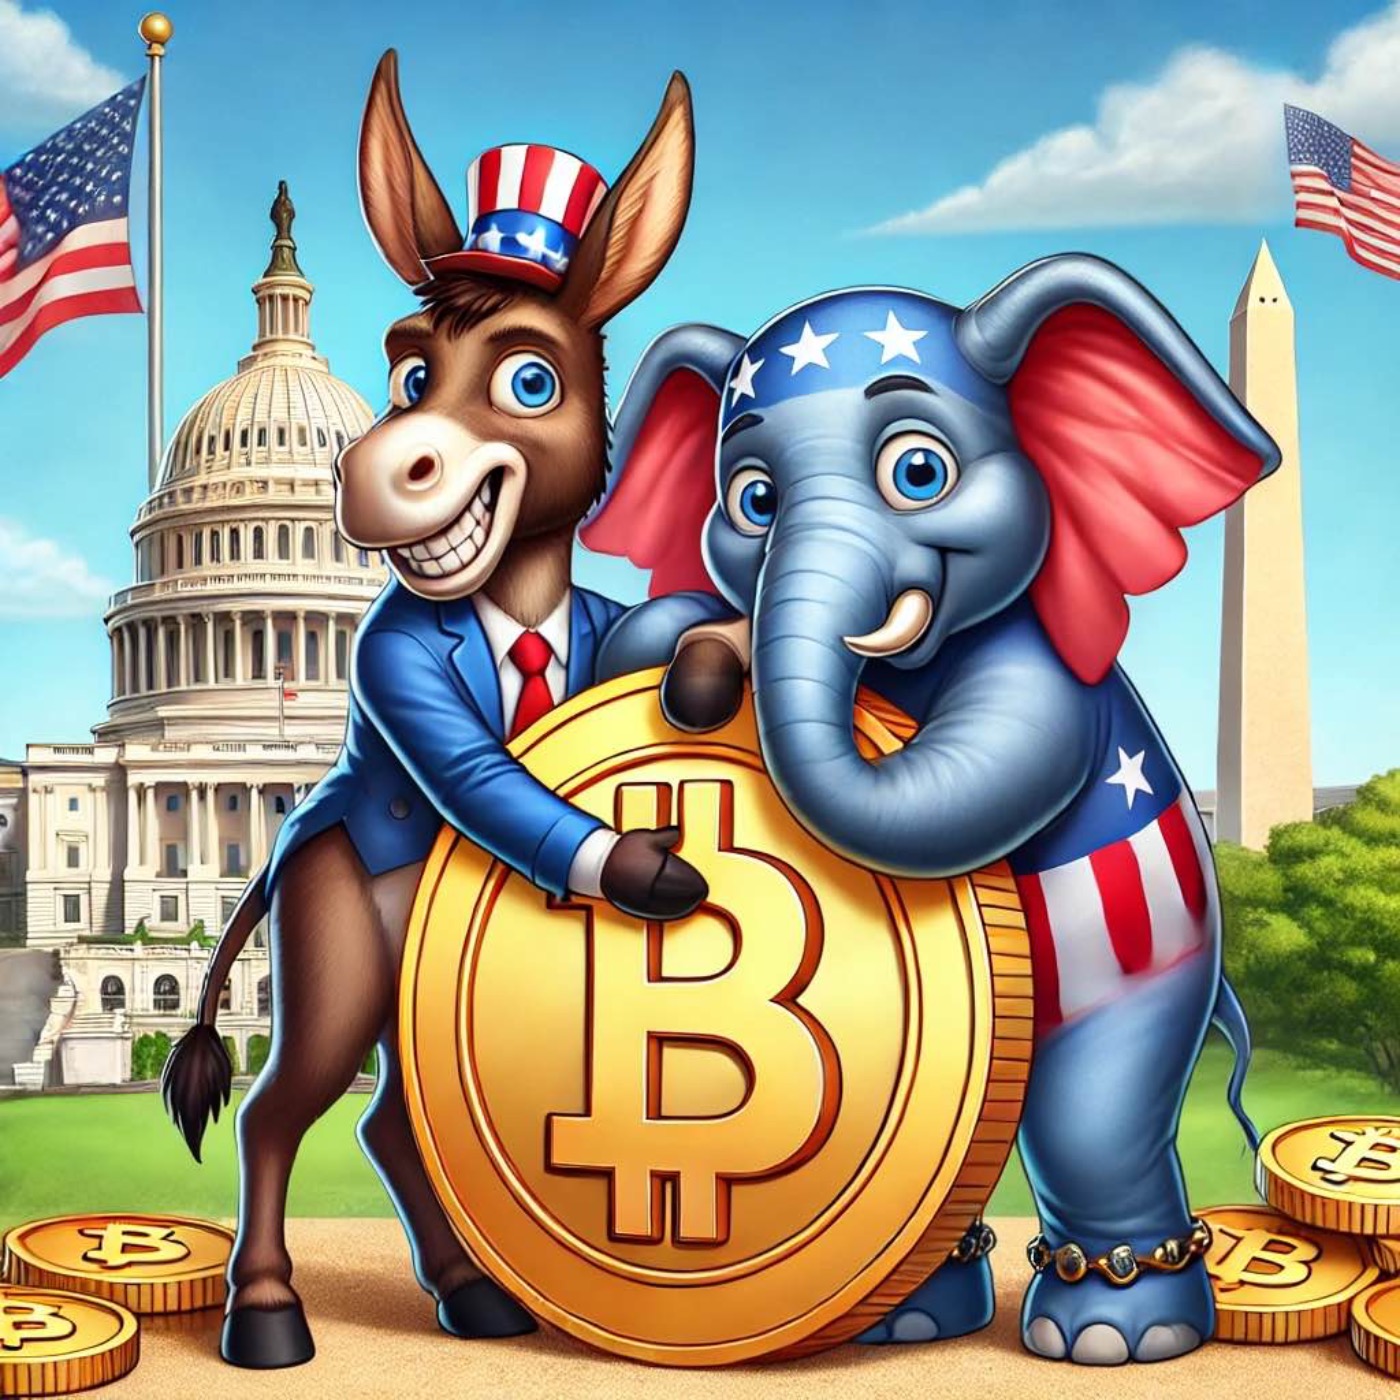 July 22:  Joe Biden Drops! What Does That Mean for Crypto?